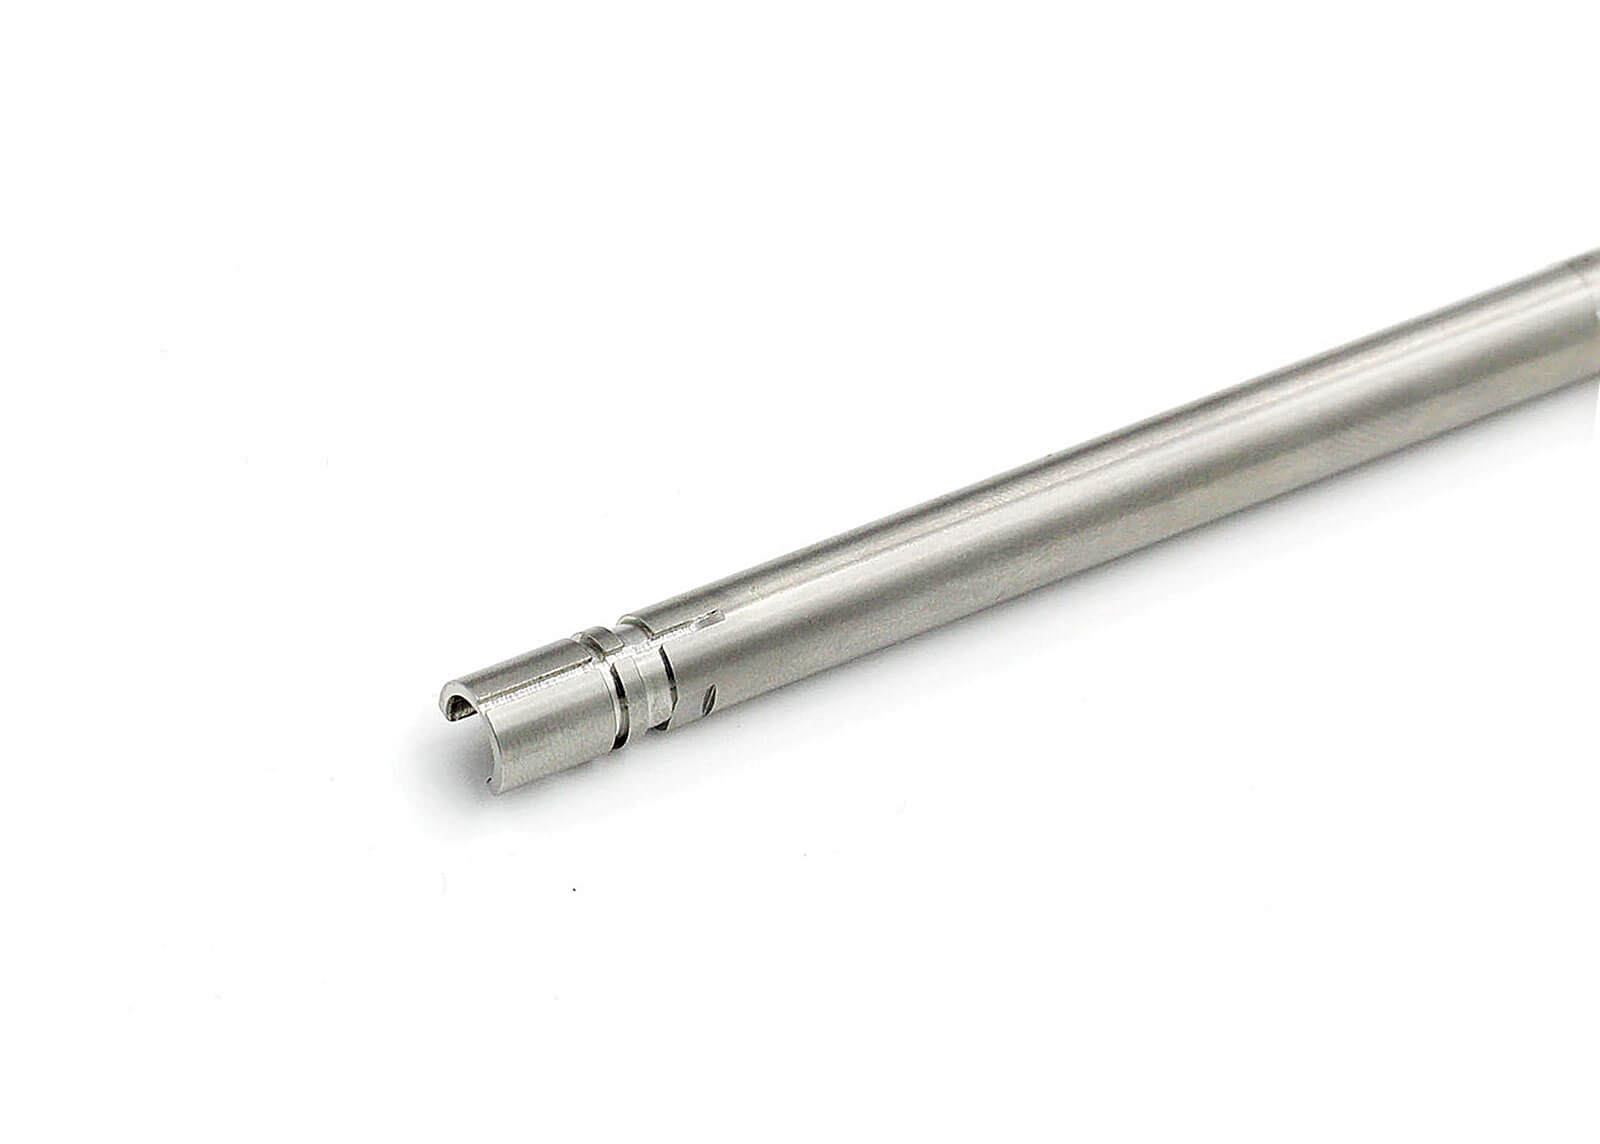 Stainless Steel 6.03mm Precision GBB Inner Barrel 100mm(Marui HK45) - Modify Airsoft Parts